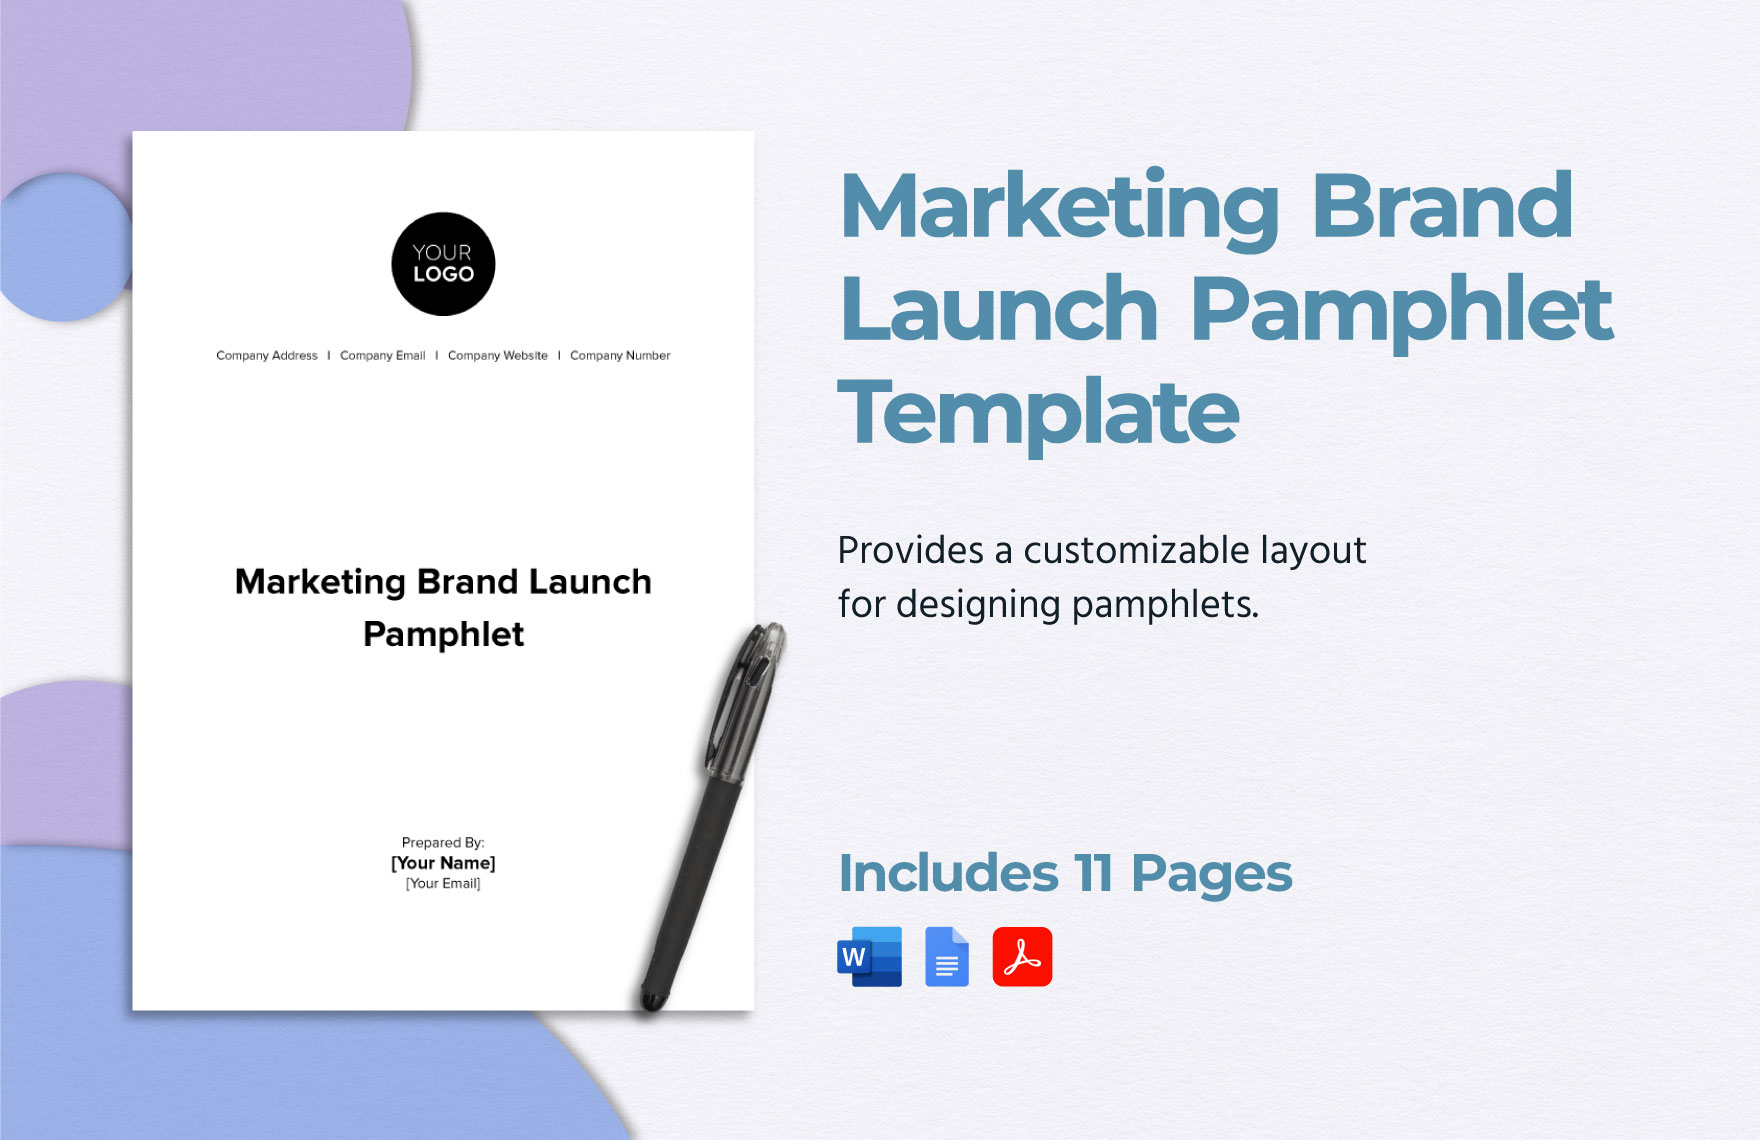 Marketing Brand Launch Pamphlet Template in Word, Google Docs, PDF